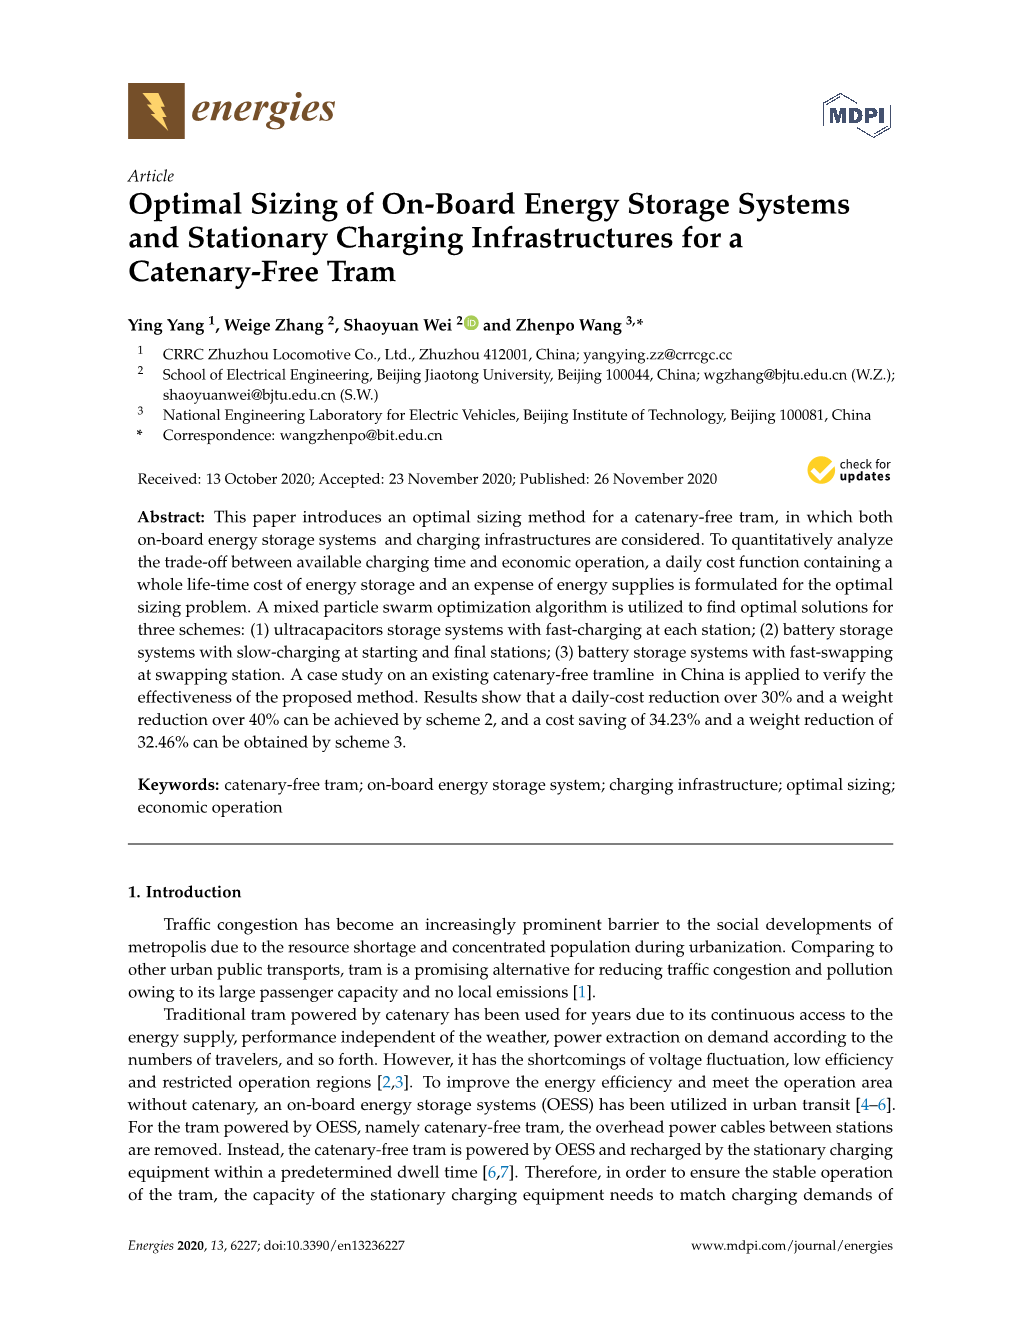 Optimal Sizing of On-Board Energy Storage Systems and Stationary Charging Infrastructures for a Catenary-Free Tram